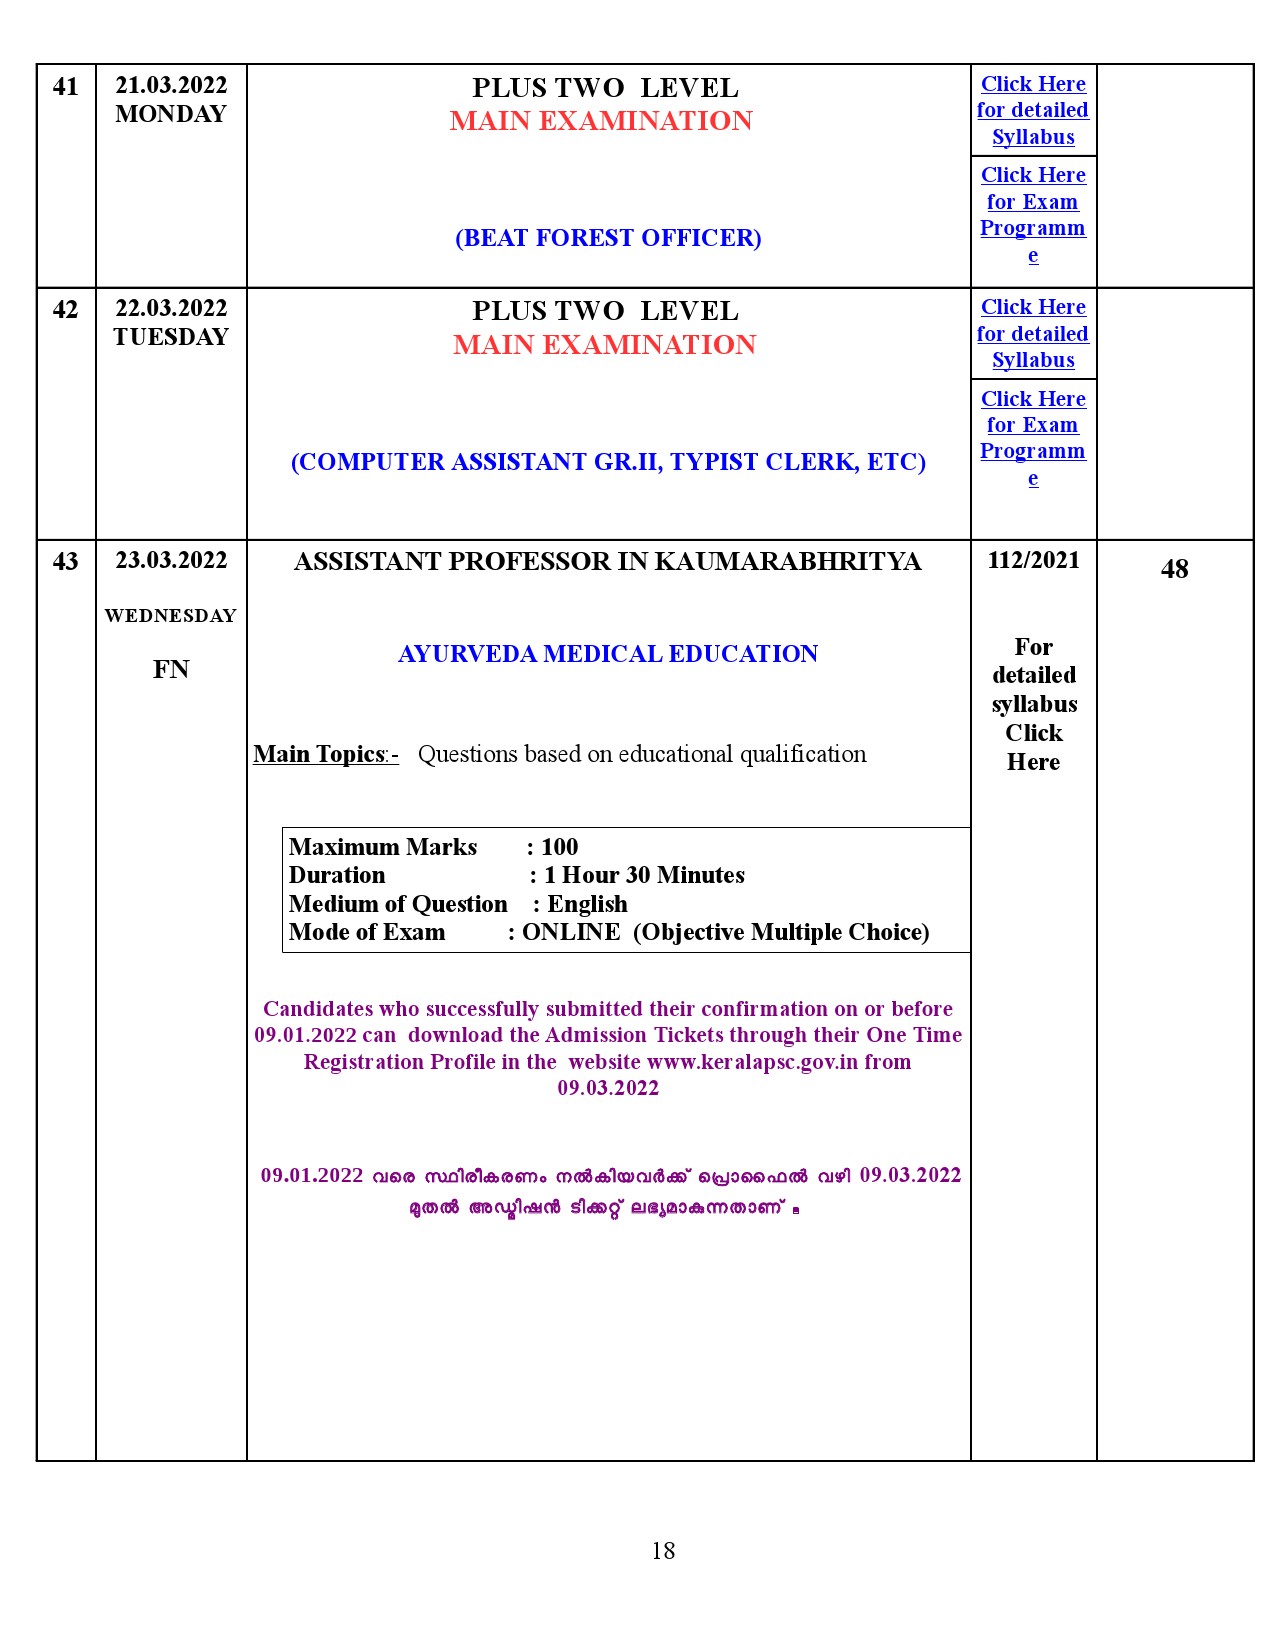 Modified Examination Programme For The Month Of March 2022 - Notification Image 18